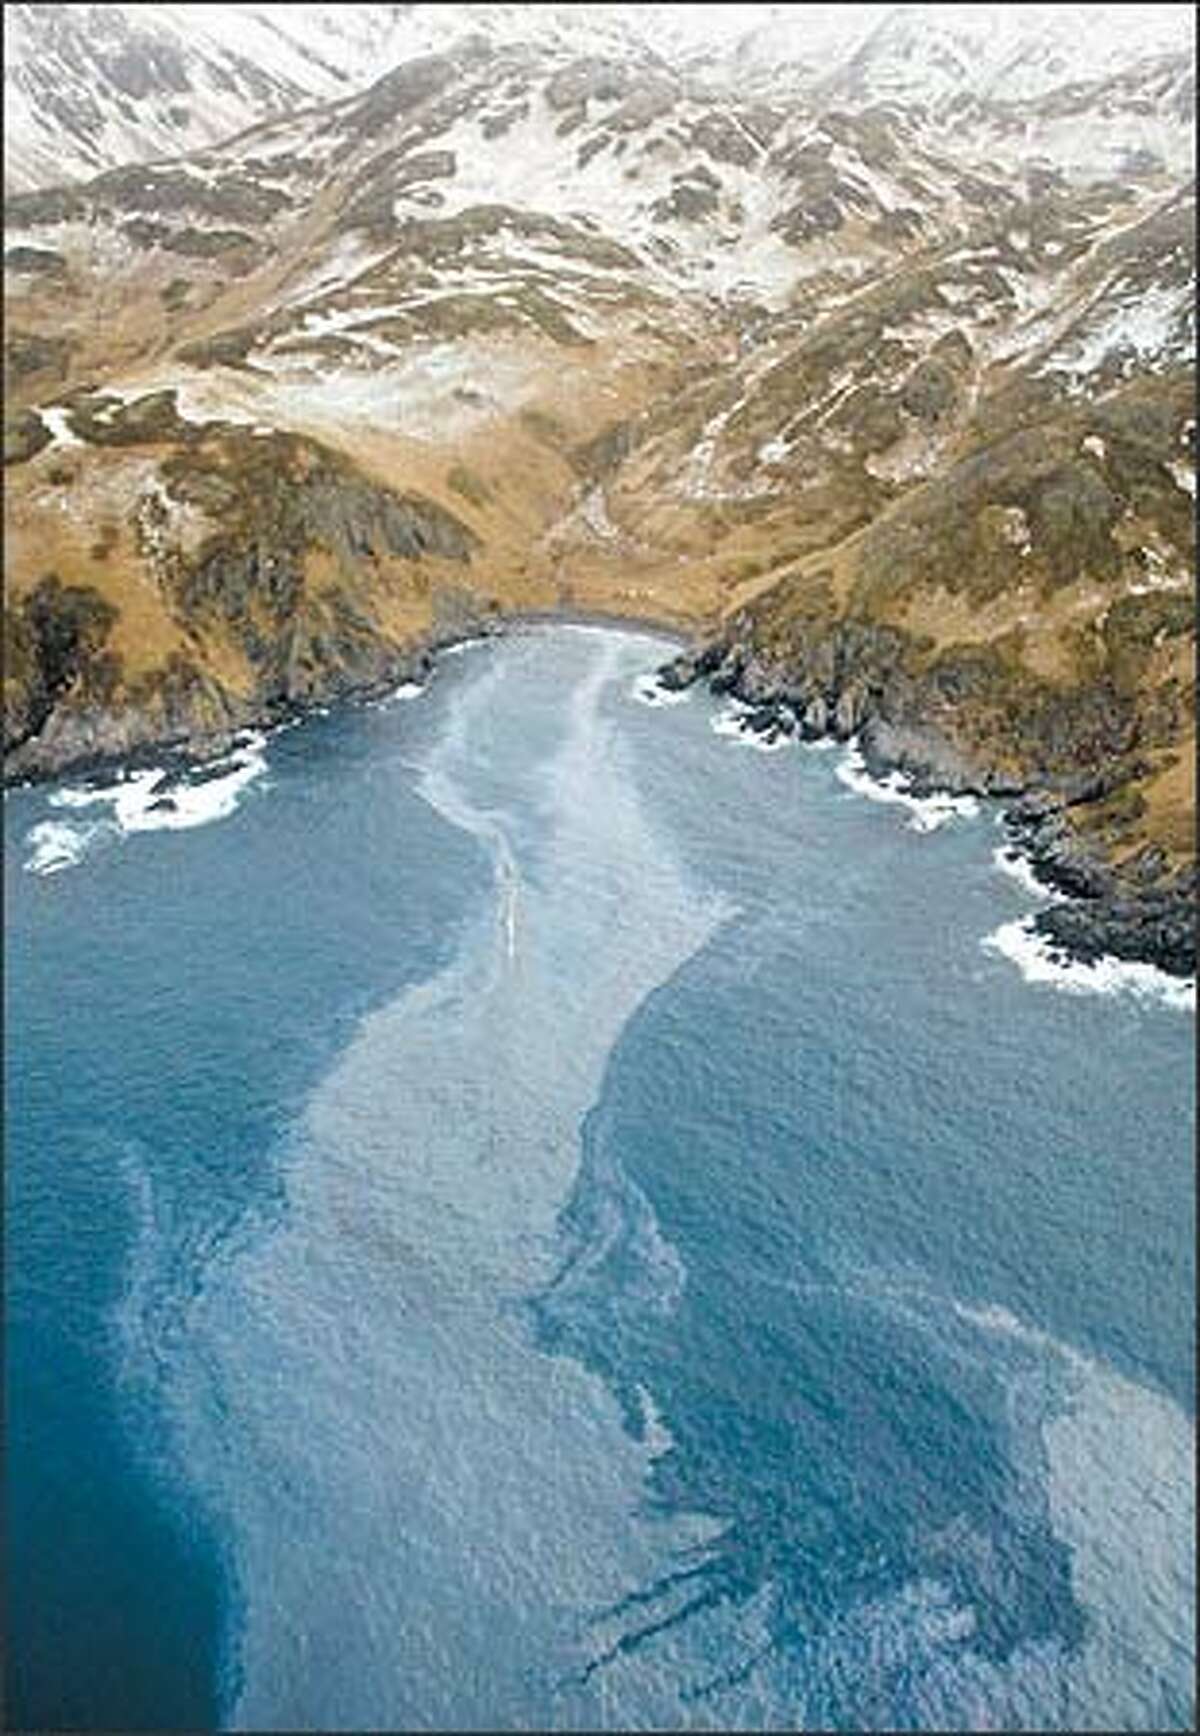 A fuel oil sheen from the Selendang Ayu wreck is seen coating the pristine coastline of the island of Unalaska.